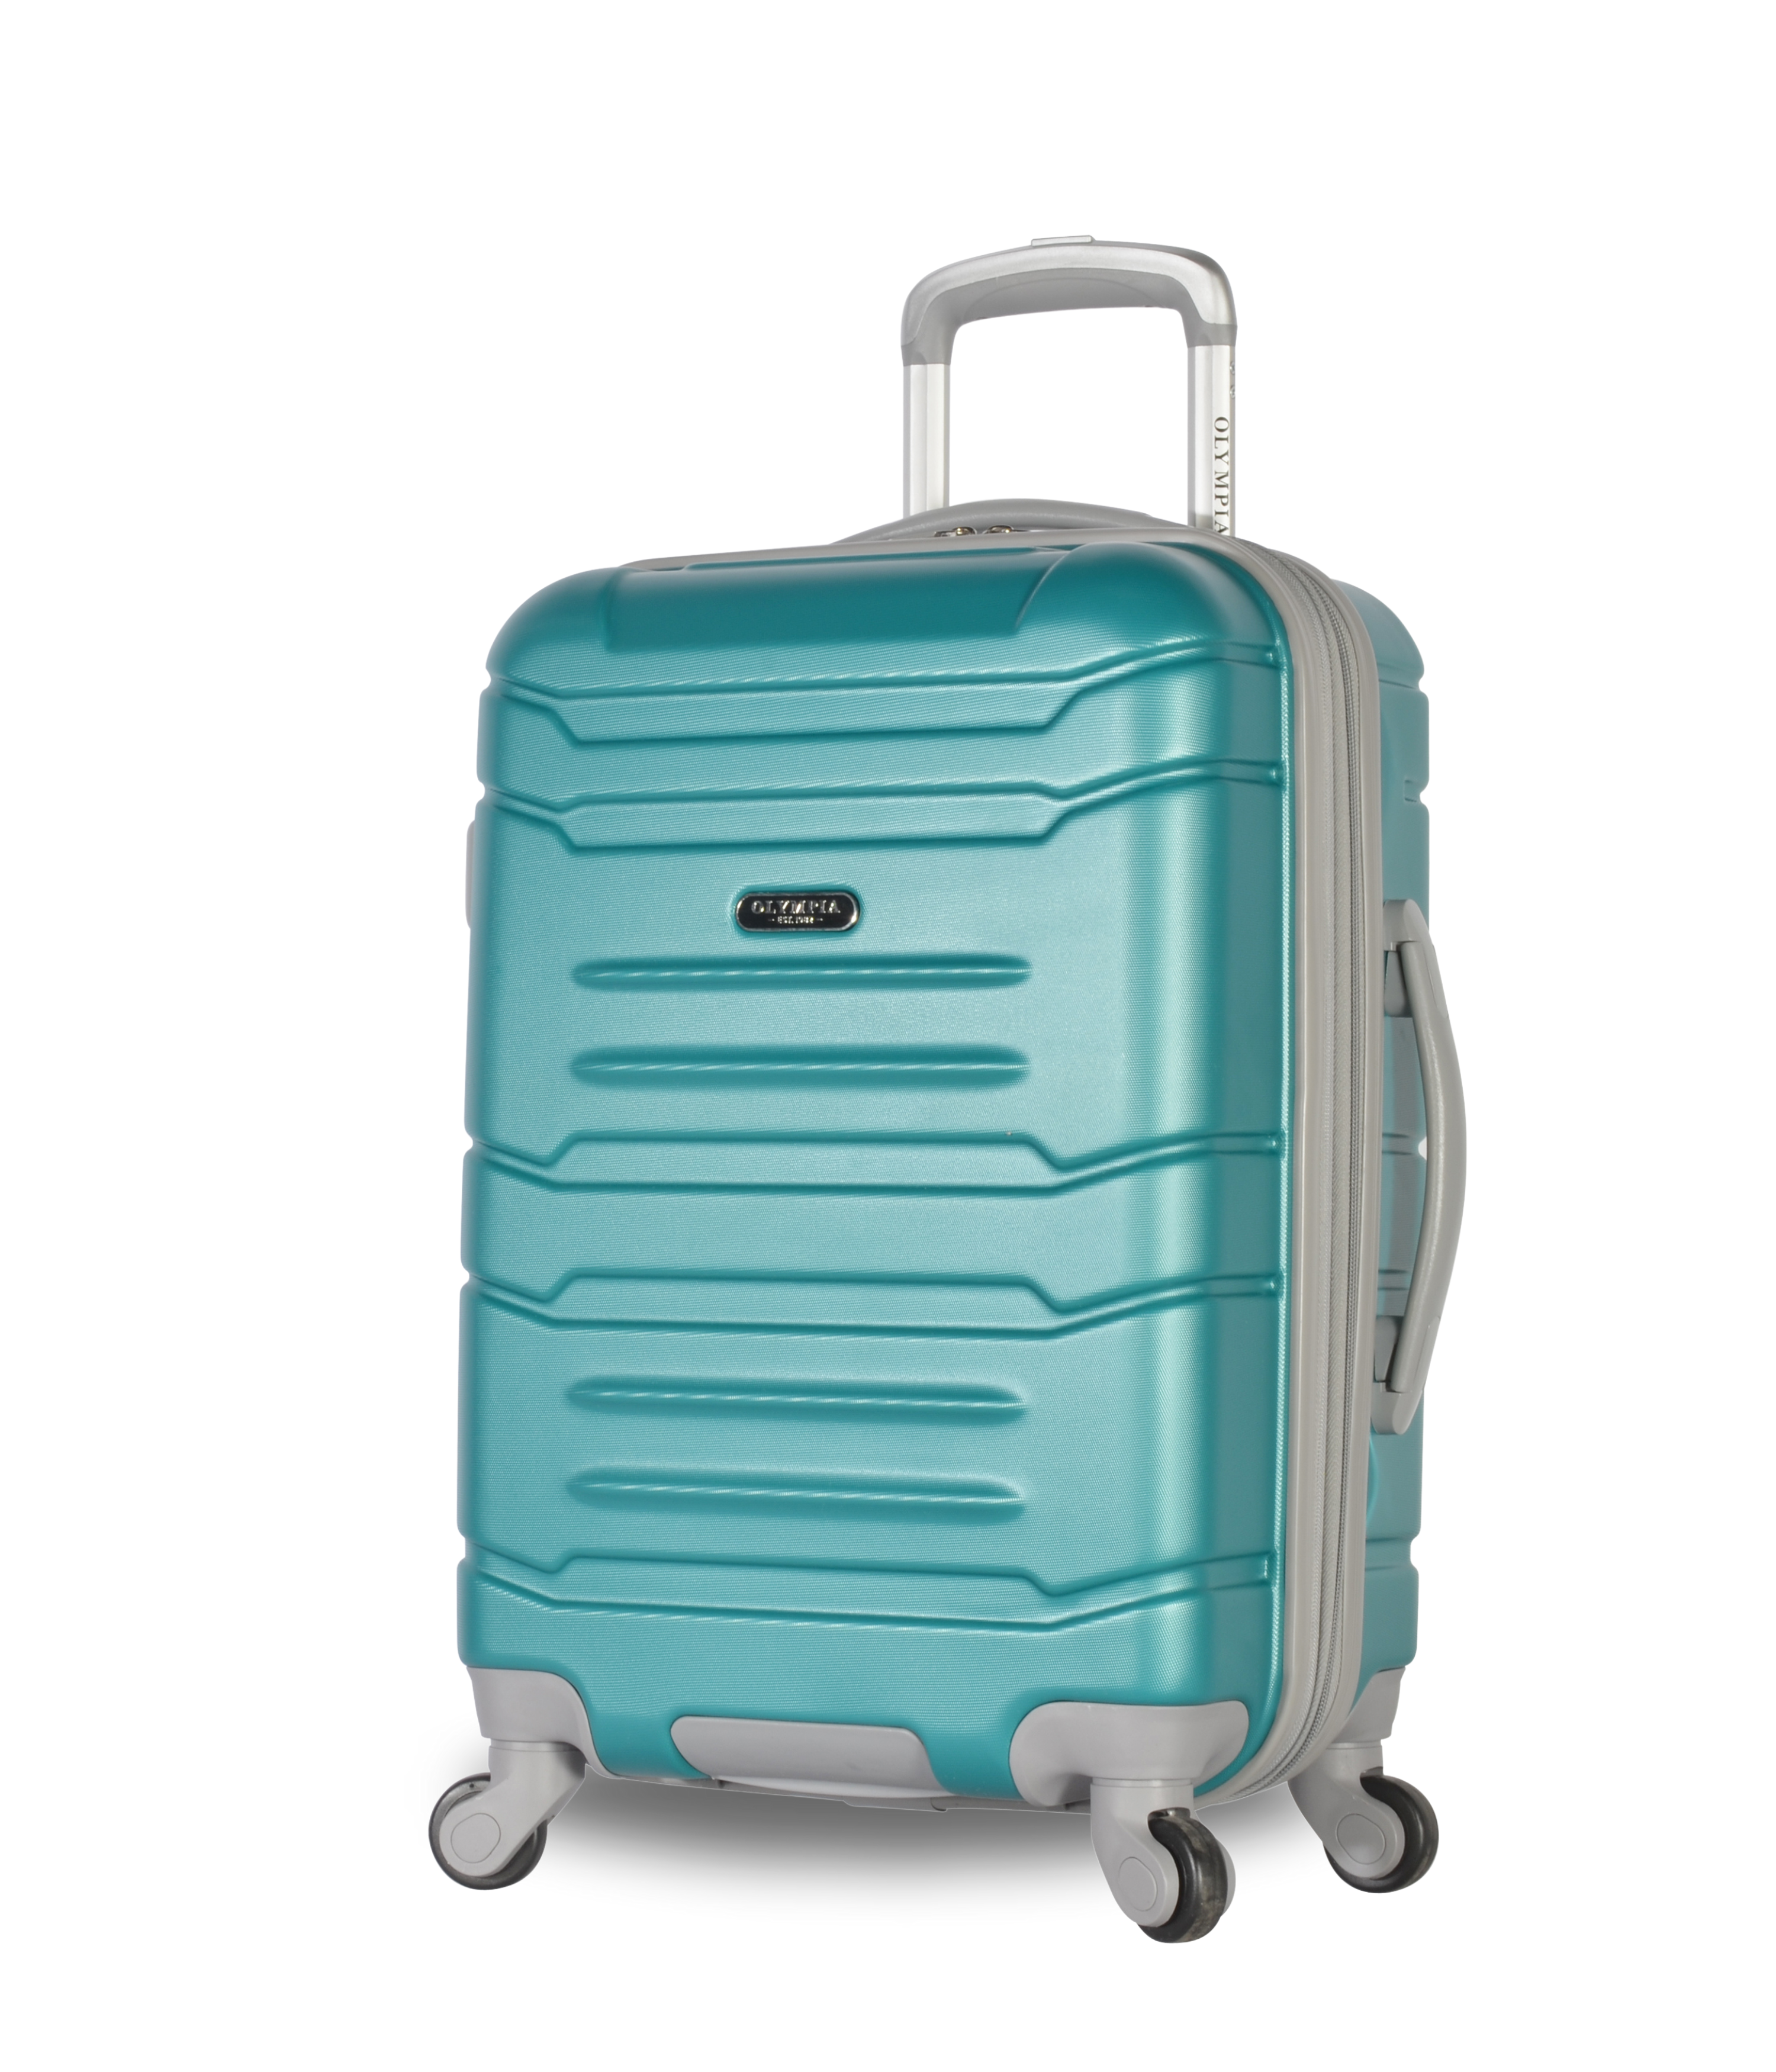 Olympia Denmark 21-Inch Lightweight Expandable Carry-On